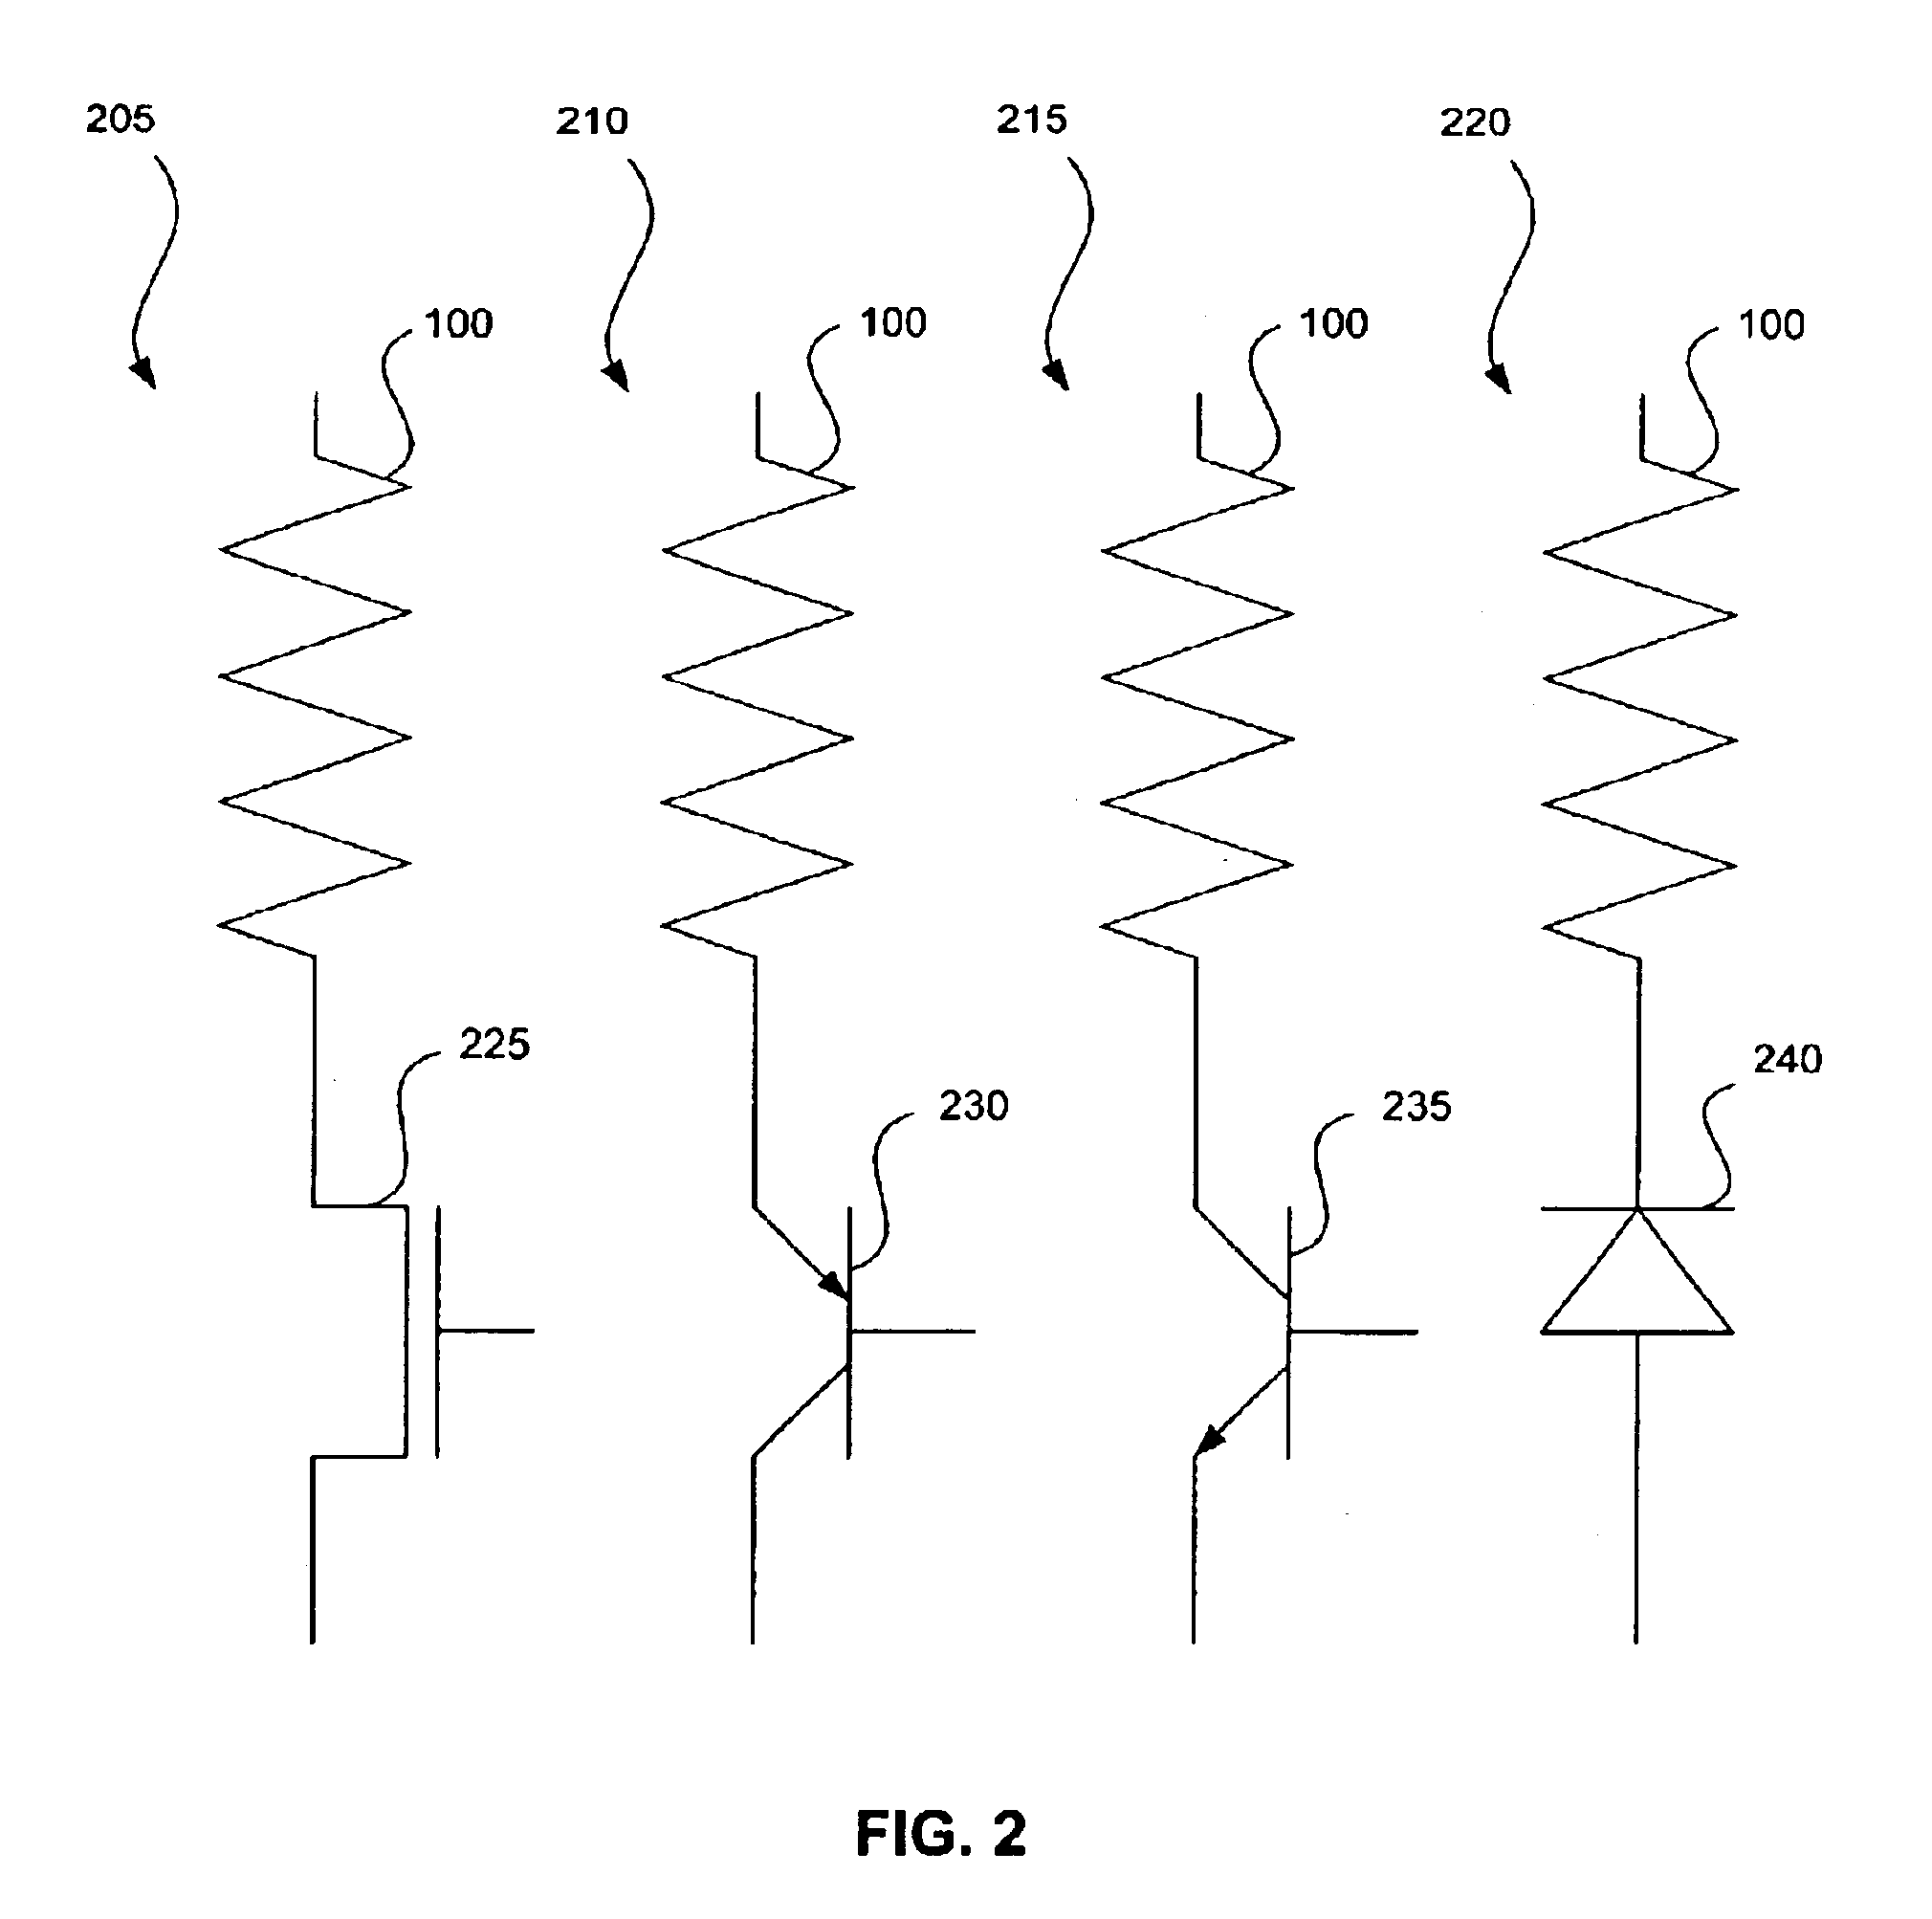 Non-volatile memory with a single transistor and resistive memory element